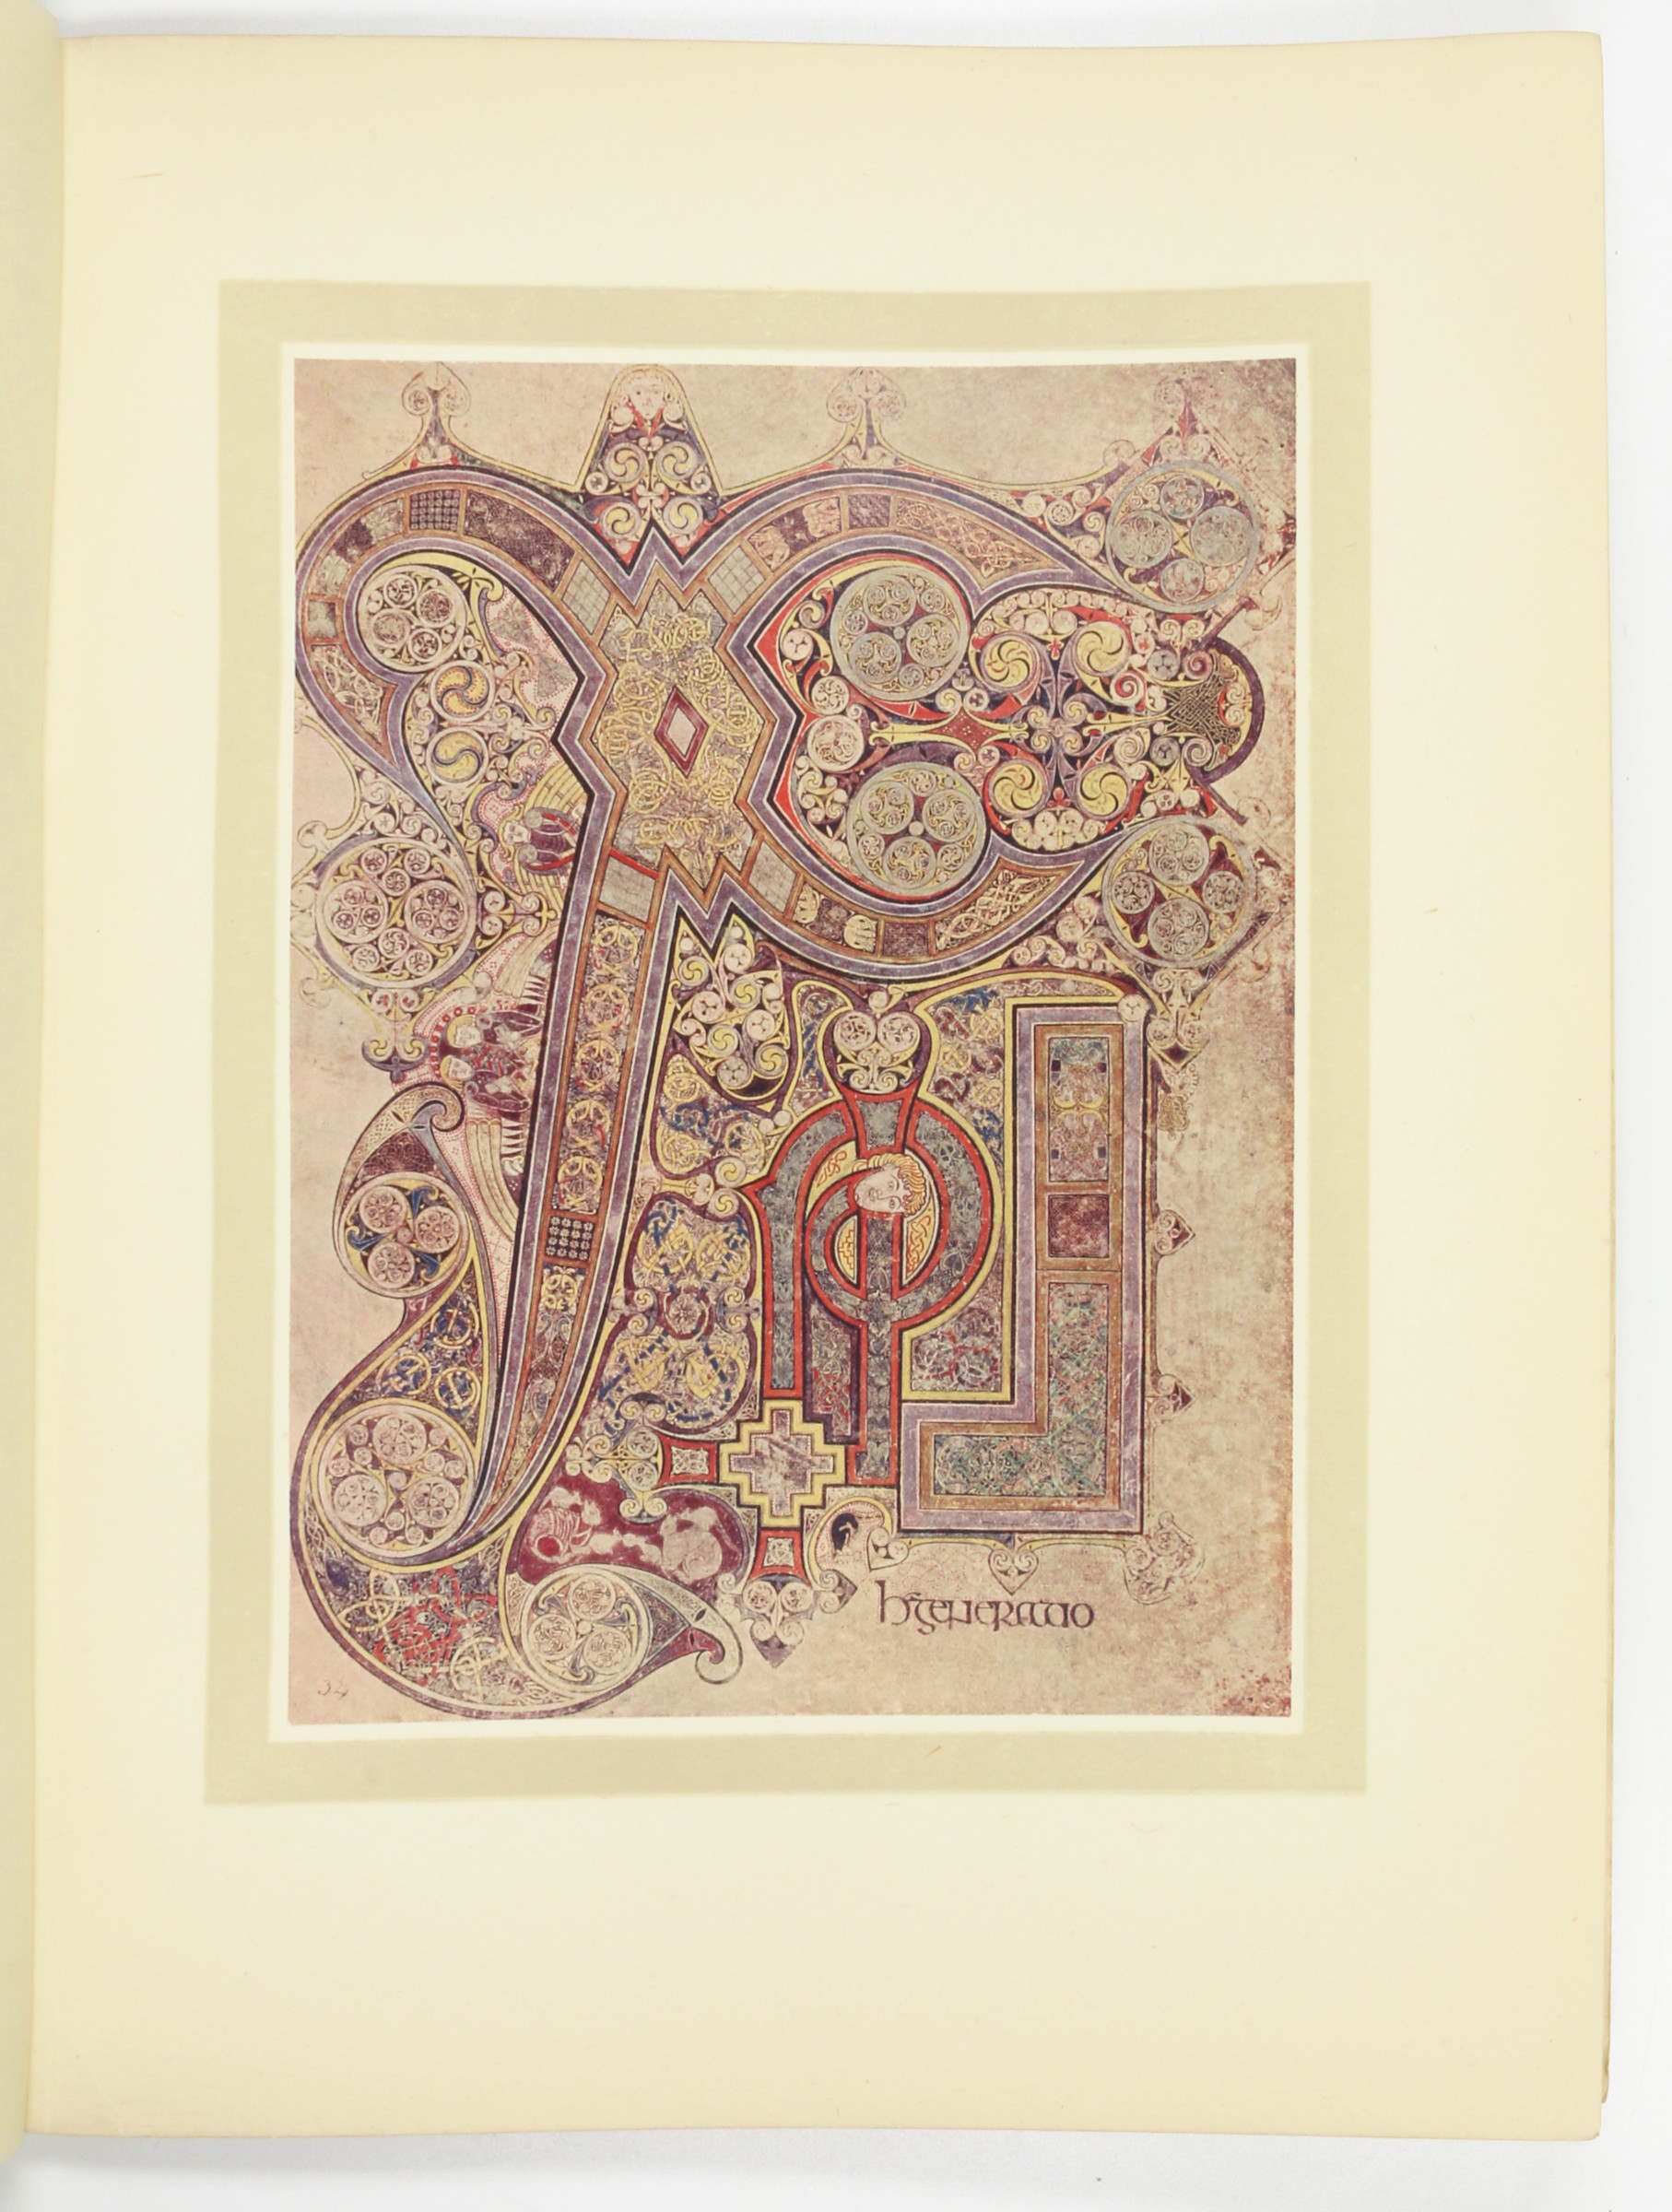 Sullivan, Sir Edward. The Book of Kells. [] Illustrated with 